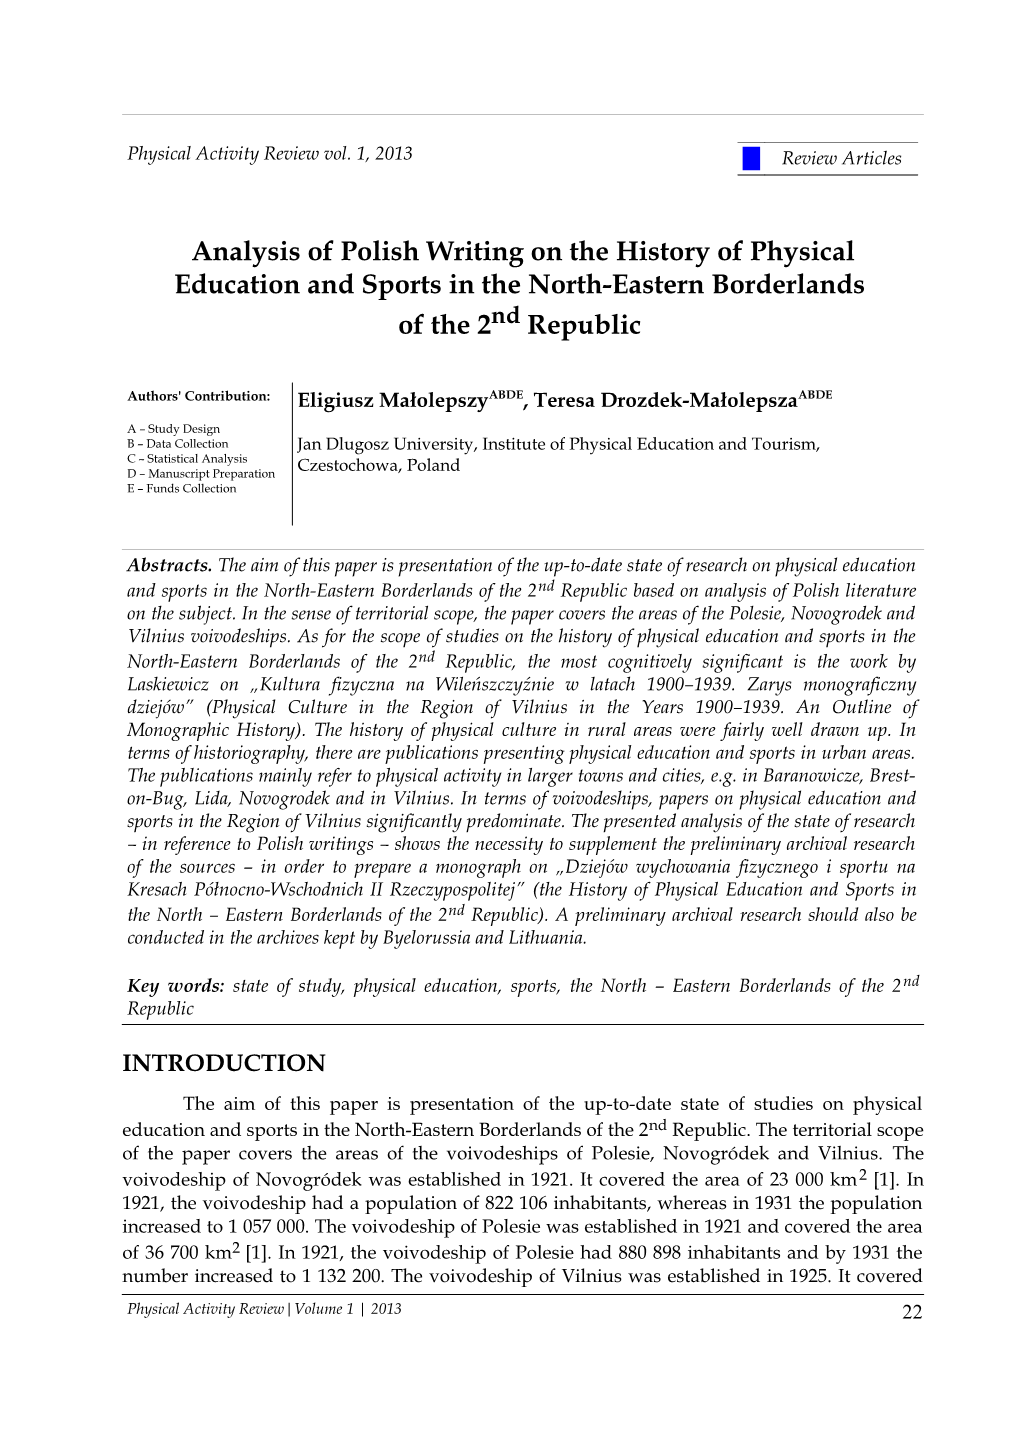 Physical Activity Review Vol